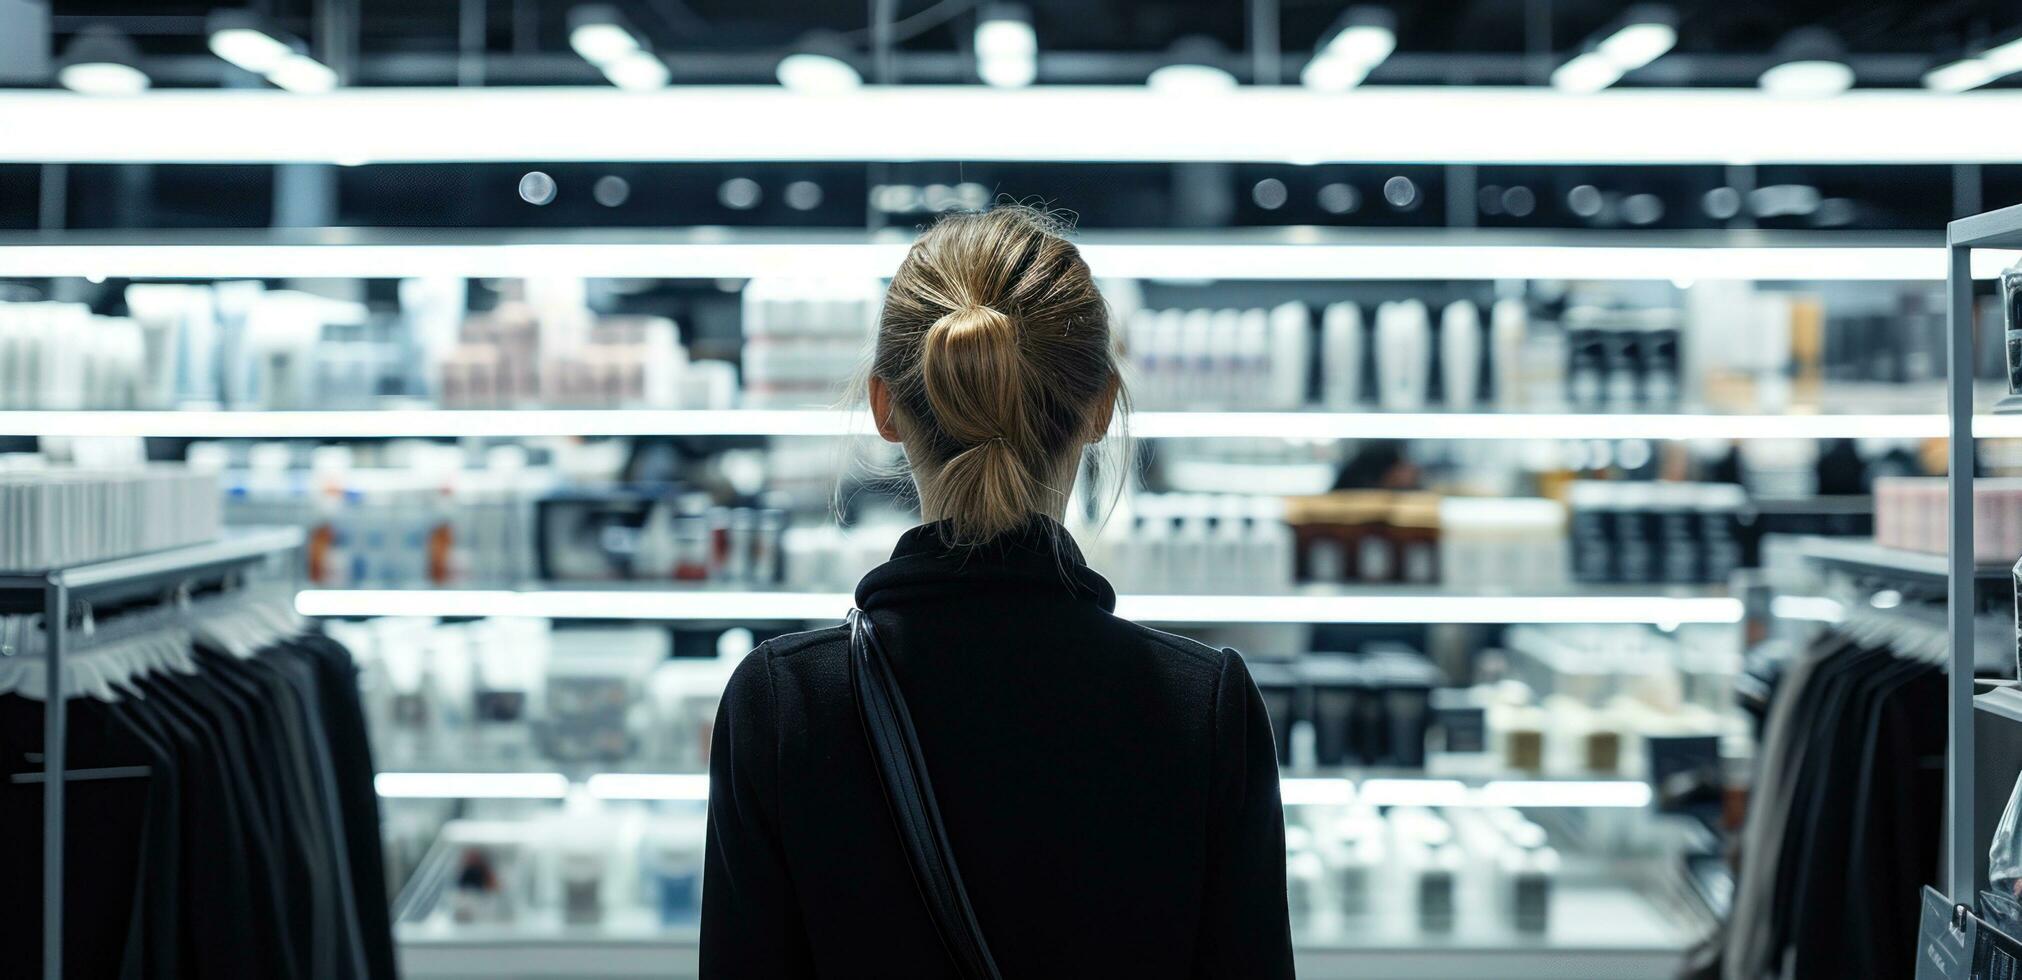 AI generated an image with a woman in black standing alone in a store photo